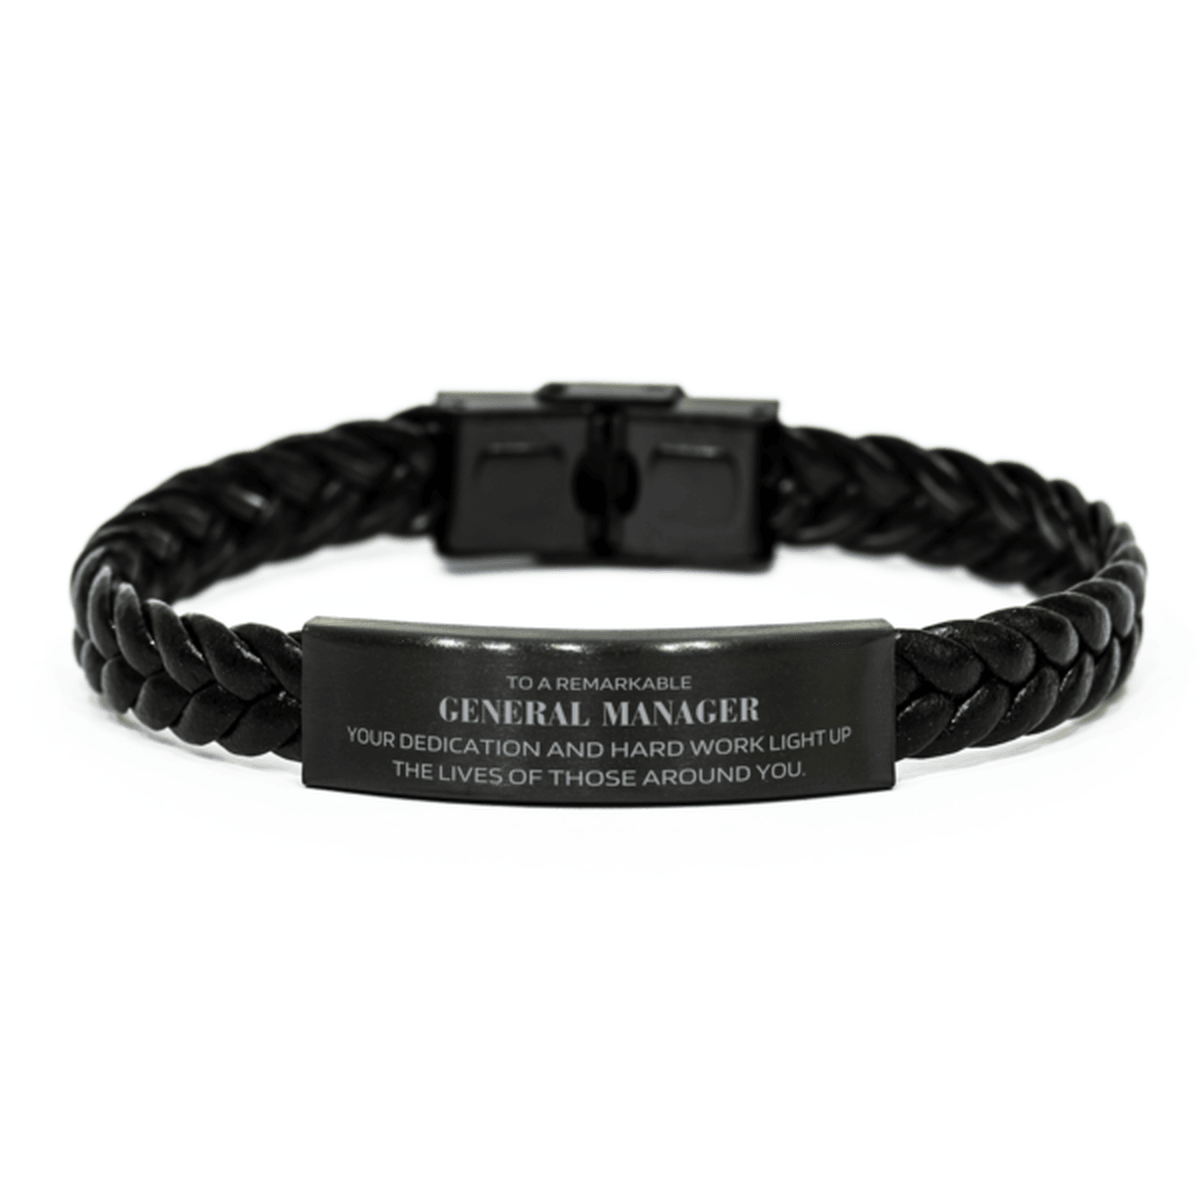 Remarkable General Manager Gifts, Your dedication and hard work, Inspirational Birthday Christmas Unique Braided Leather Bracelet For General Manager, Coworkers, Men, Women, Friends - Mallard Moon Gift Shop